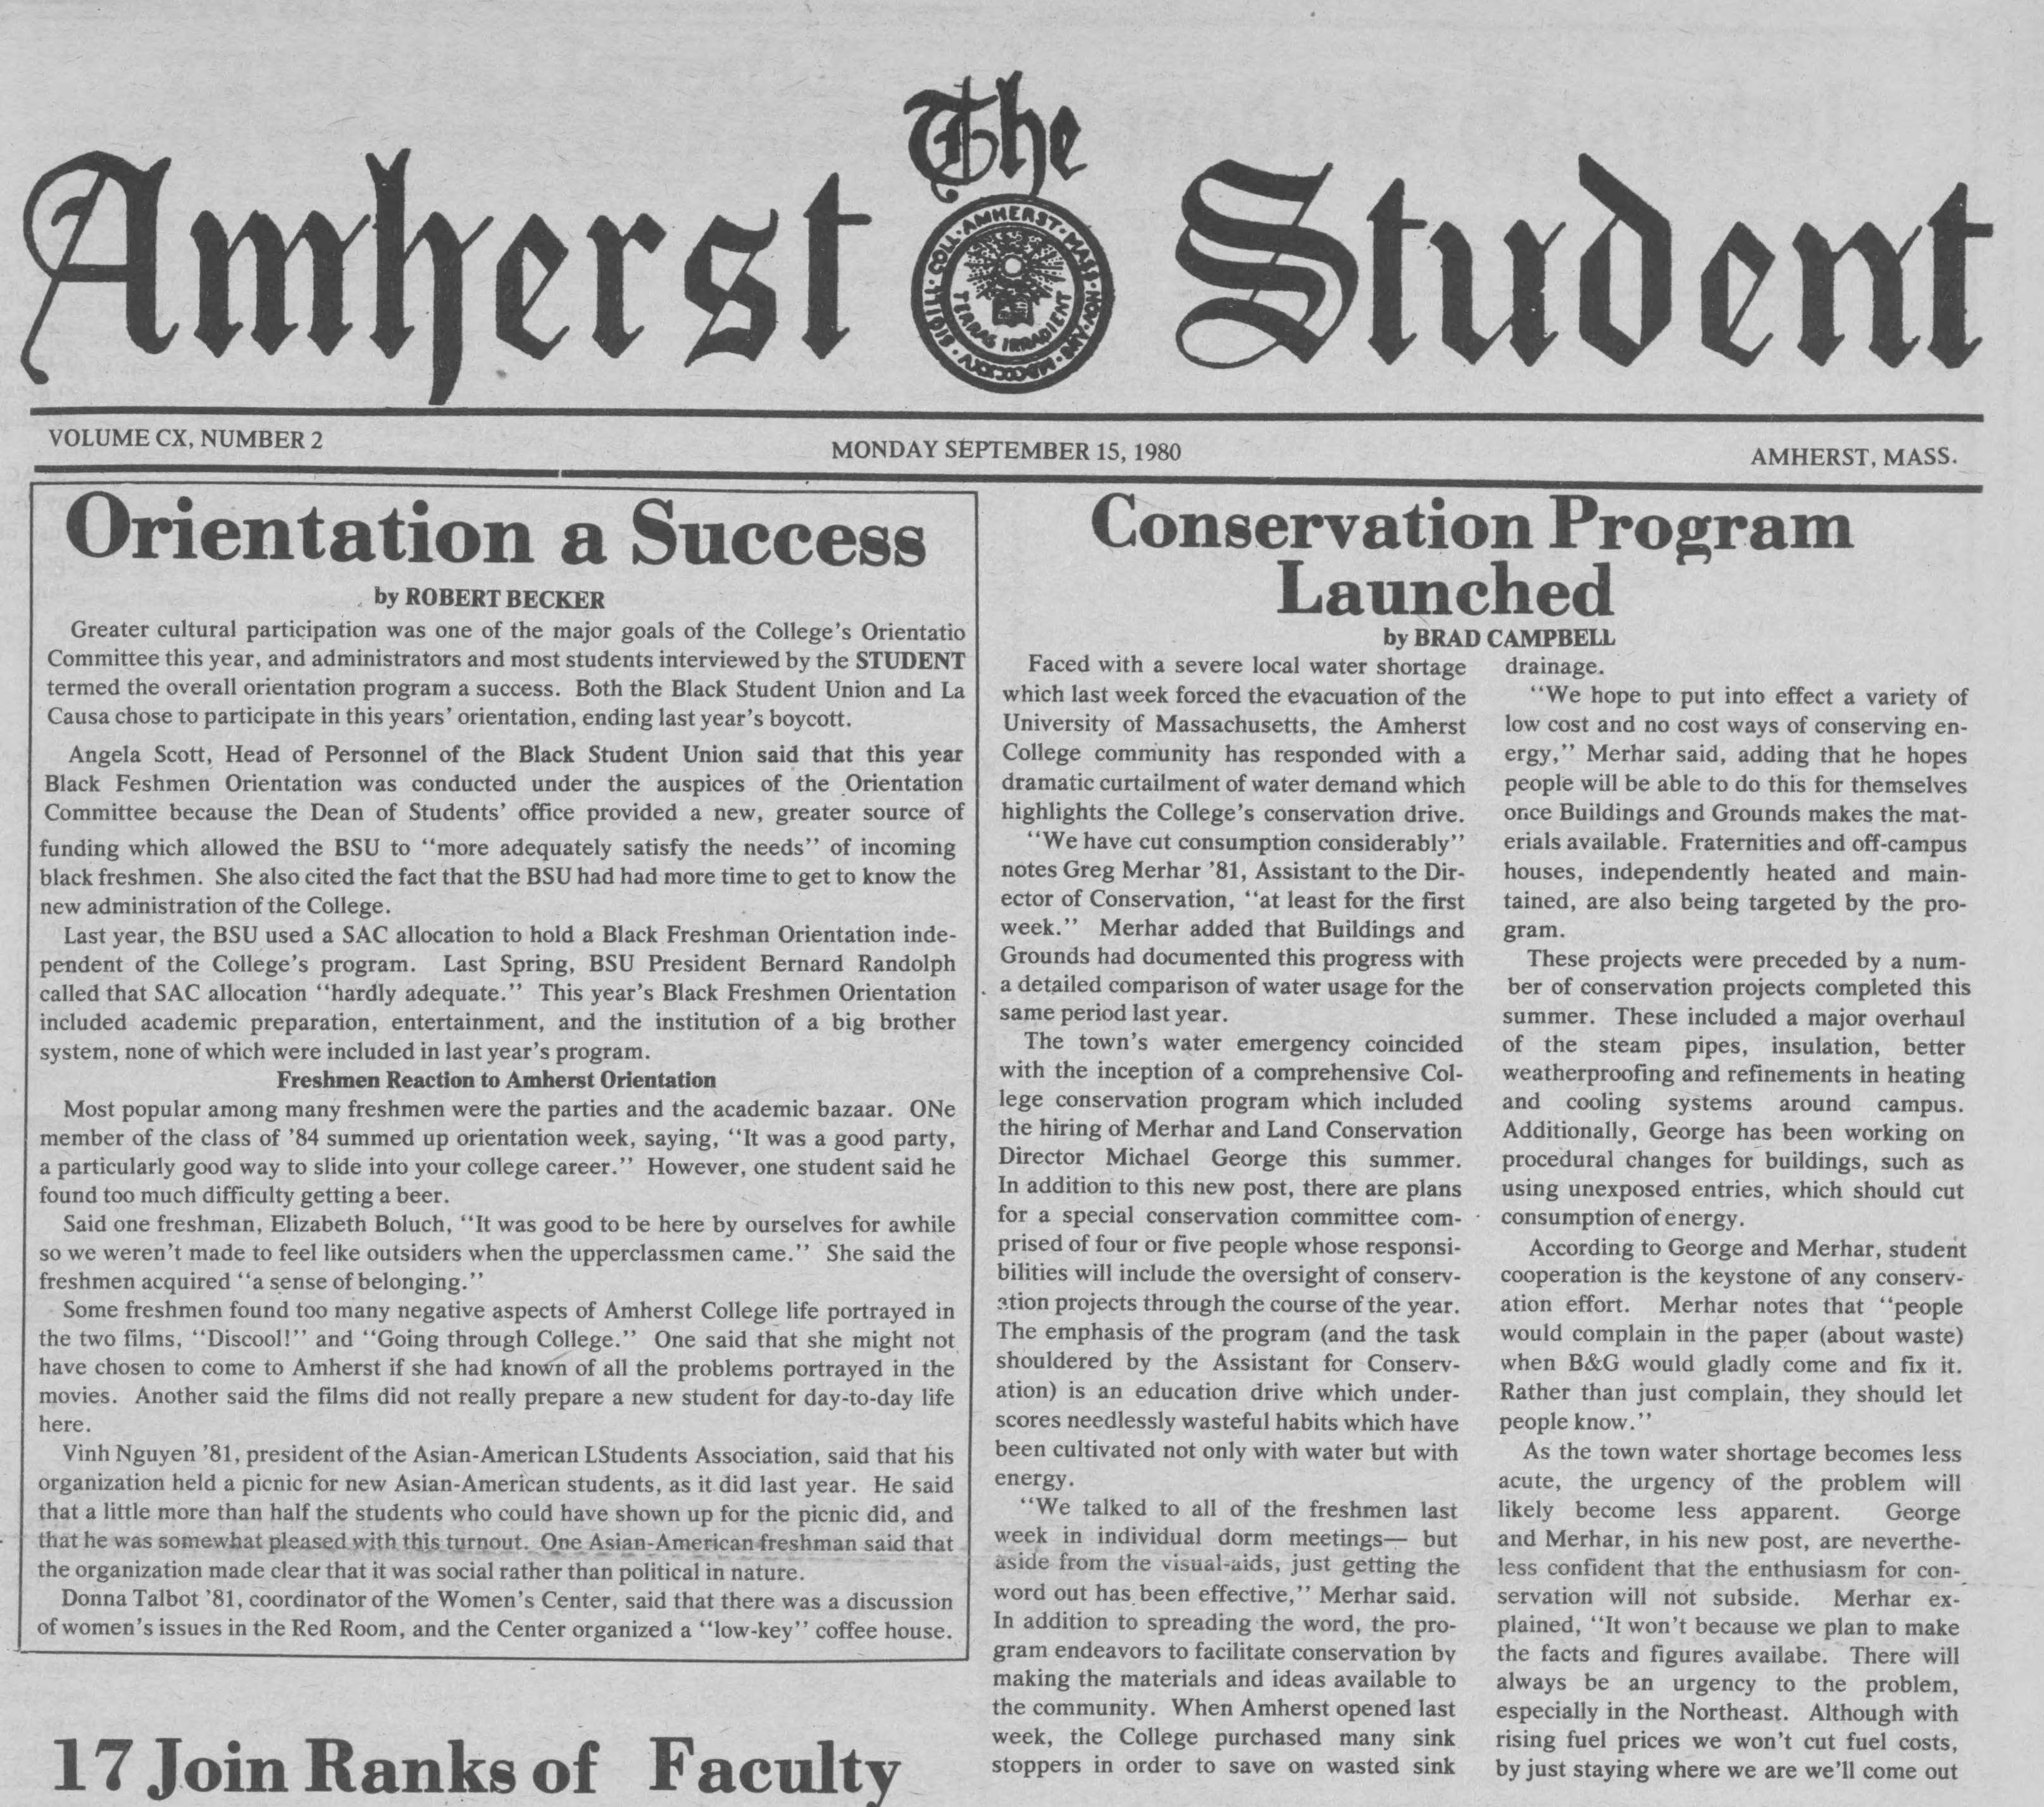 The Amherst Student Sept 15, 1980